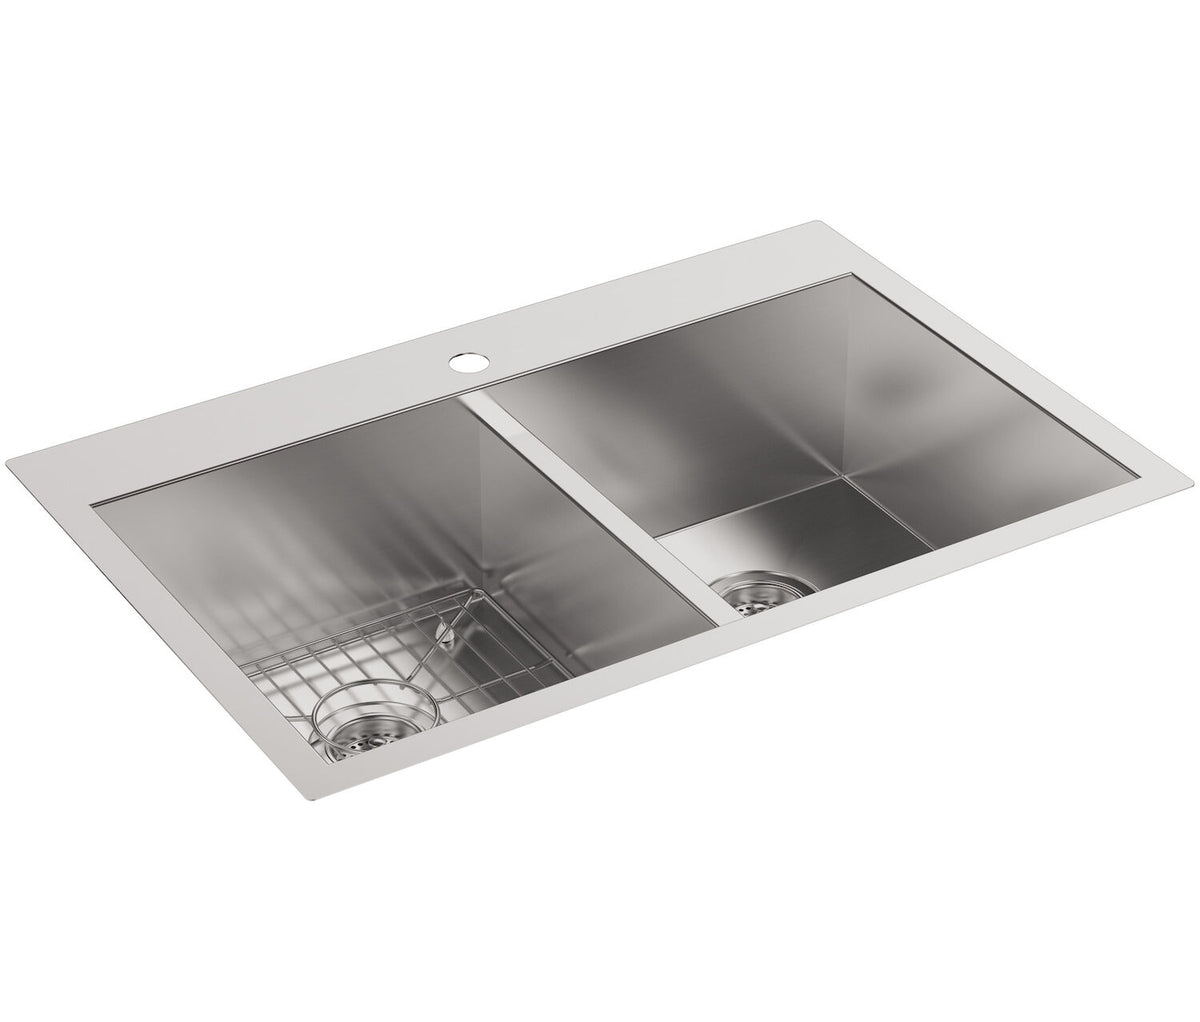 VAULT™ 33 X 22 X 9-5/16 INCHES TOP-/UNDER-MOUNT DOUBLE-EQUAL BOWL KITCHEN SINK WITH SINGLE FAUCET HOLE